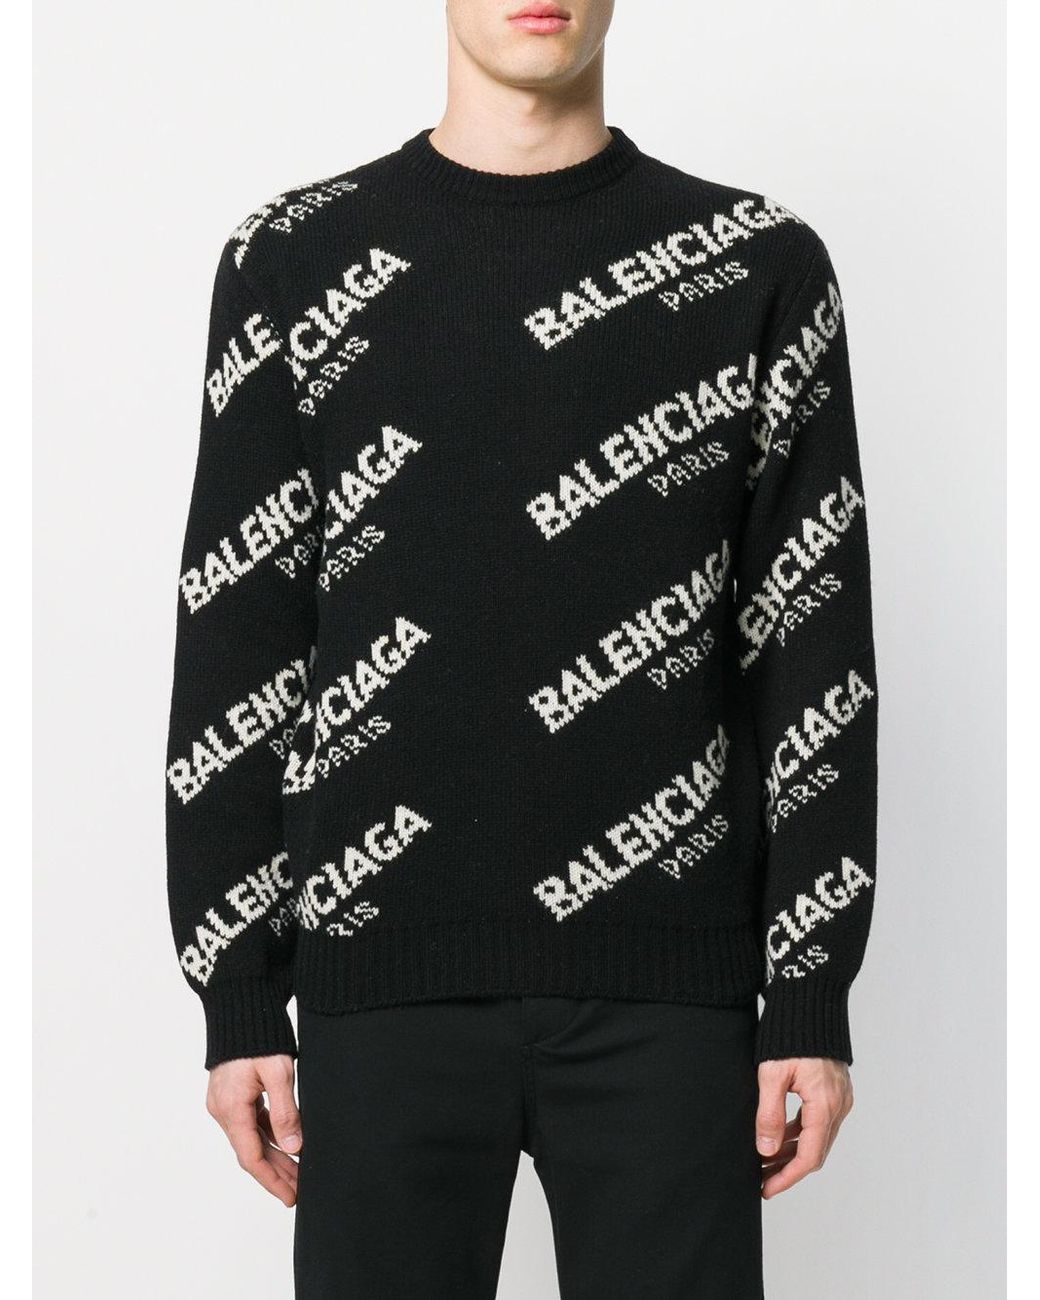 Balenciaga All Over Sweater in Black for Men | Lyst